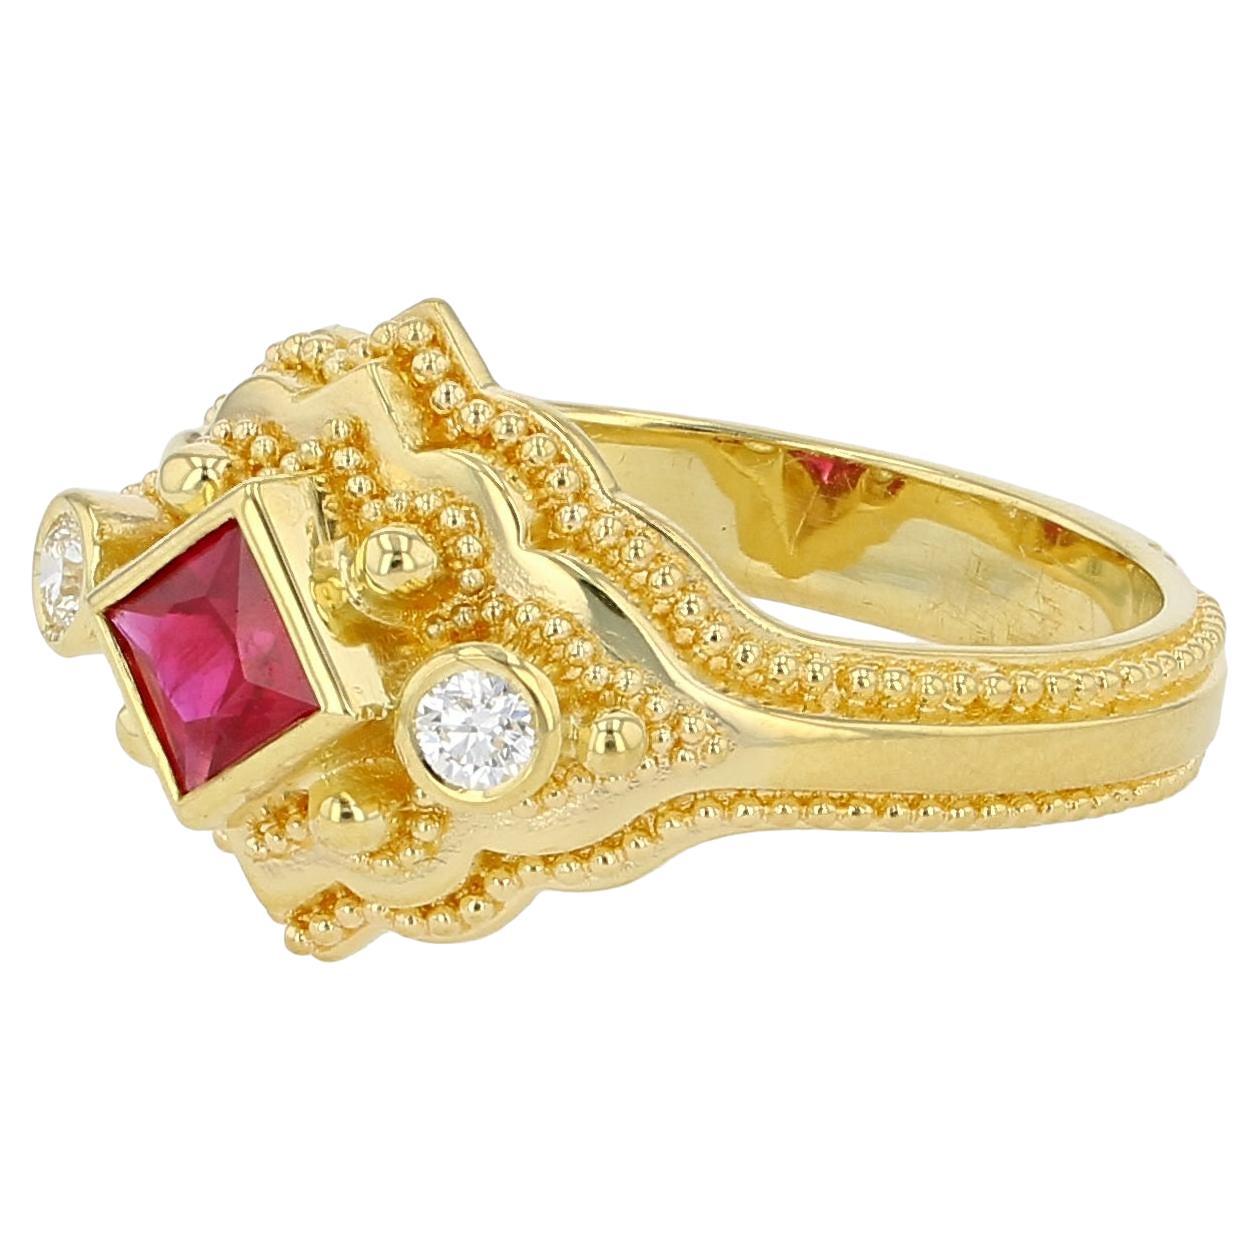 18 karat Gold Ruby and Diamond Cocktail Ring with fine Granulation